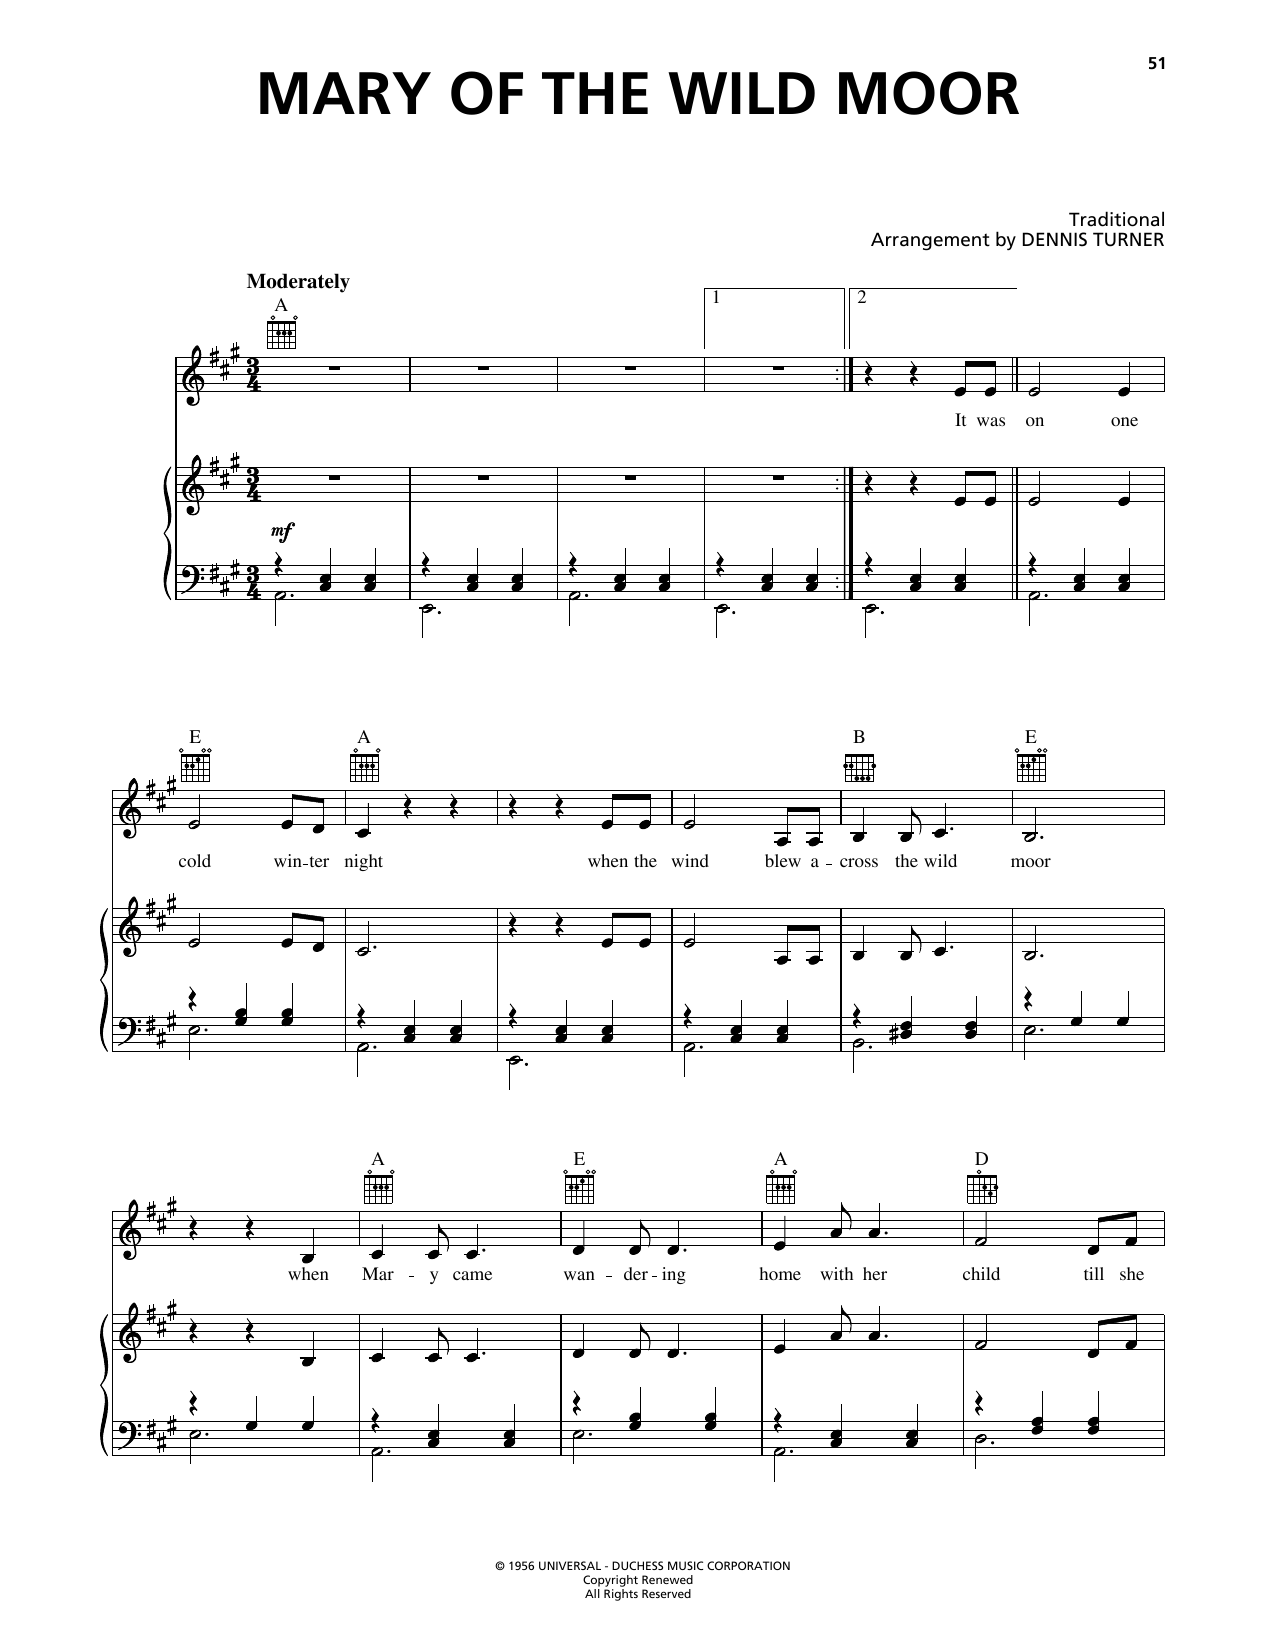 Download Johnny Cash Mary Of The Wild Moor Sheet Music